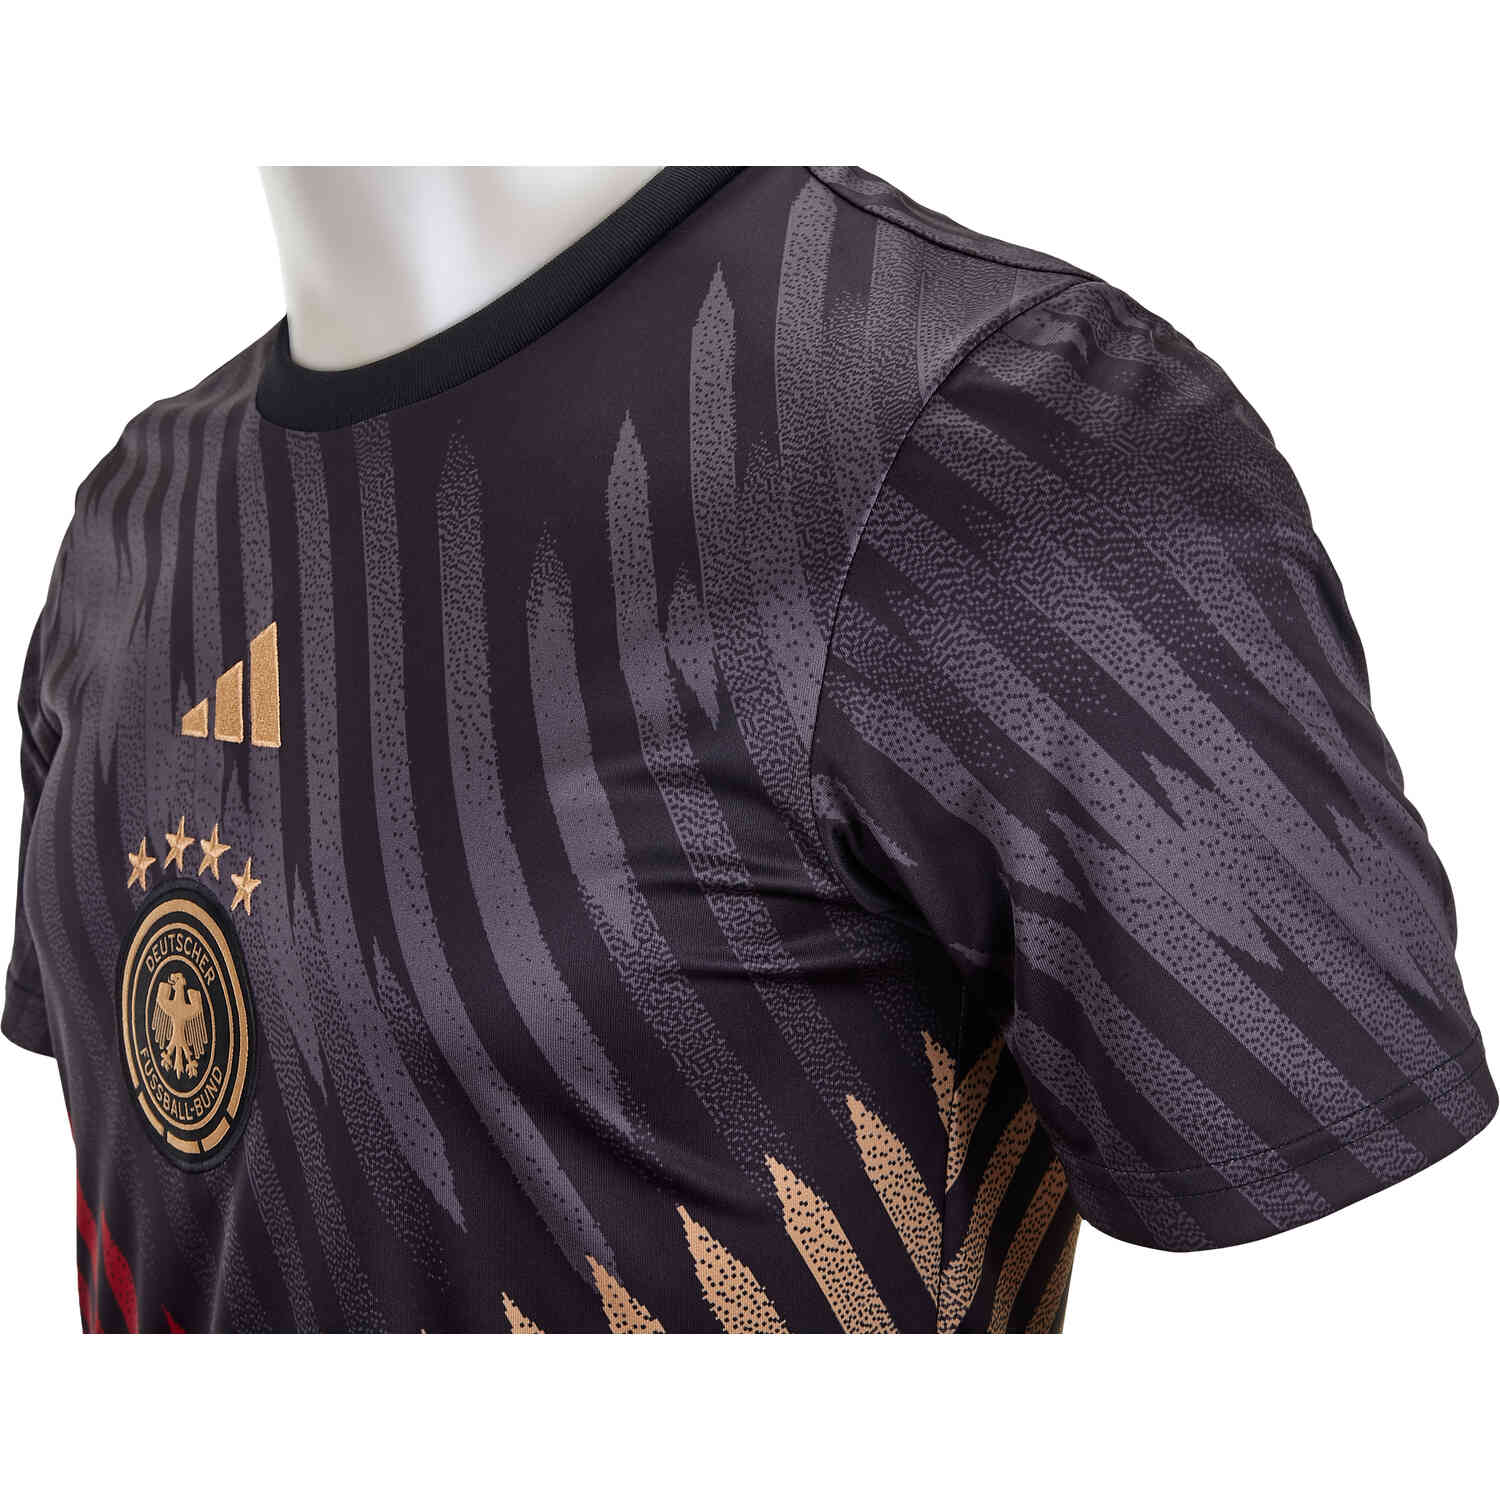 adidas Reveals 22/23 Away Jersey for Real Madrid - The Center Circle - A  SoccerPro Soccer Fan Blog